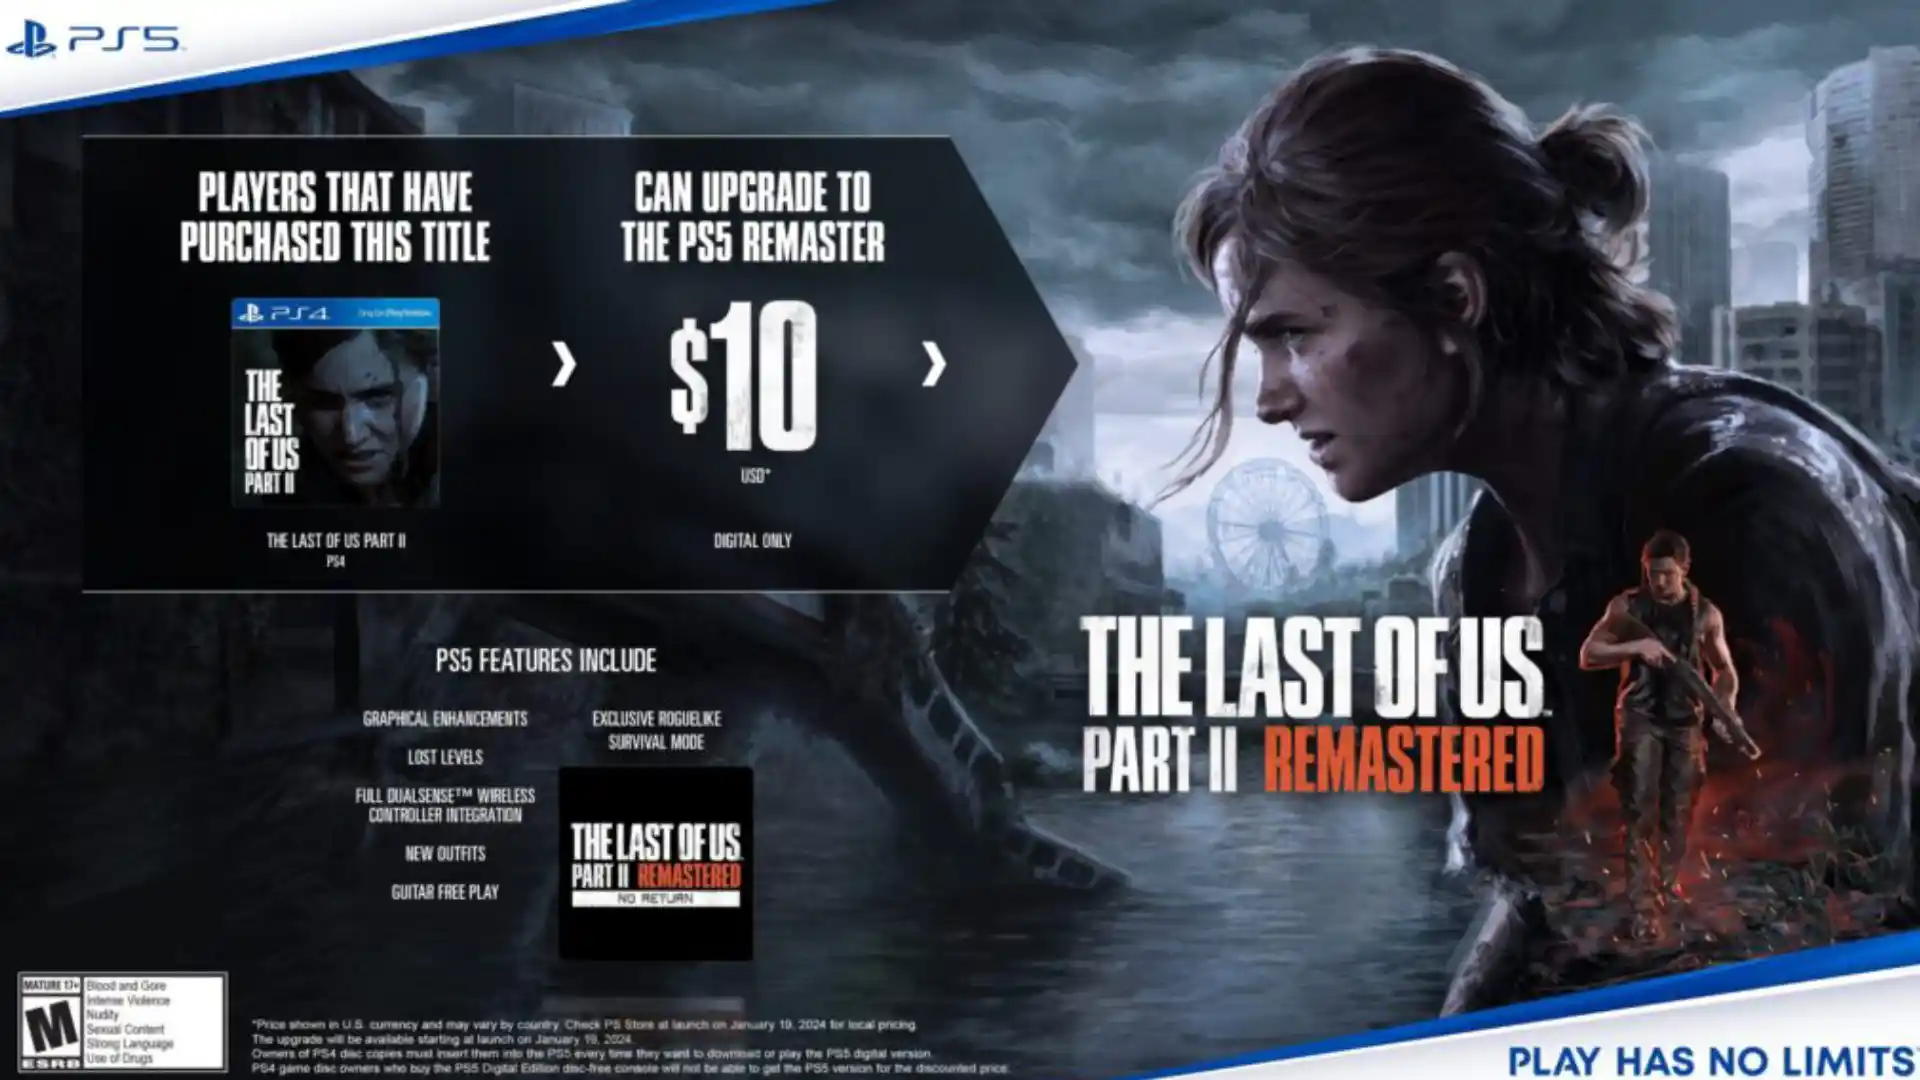 The Last of Us Part 2 Remastered for PS5